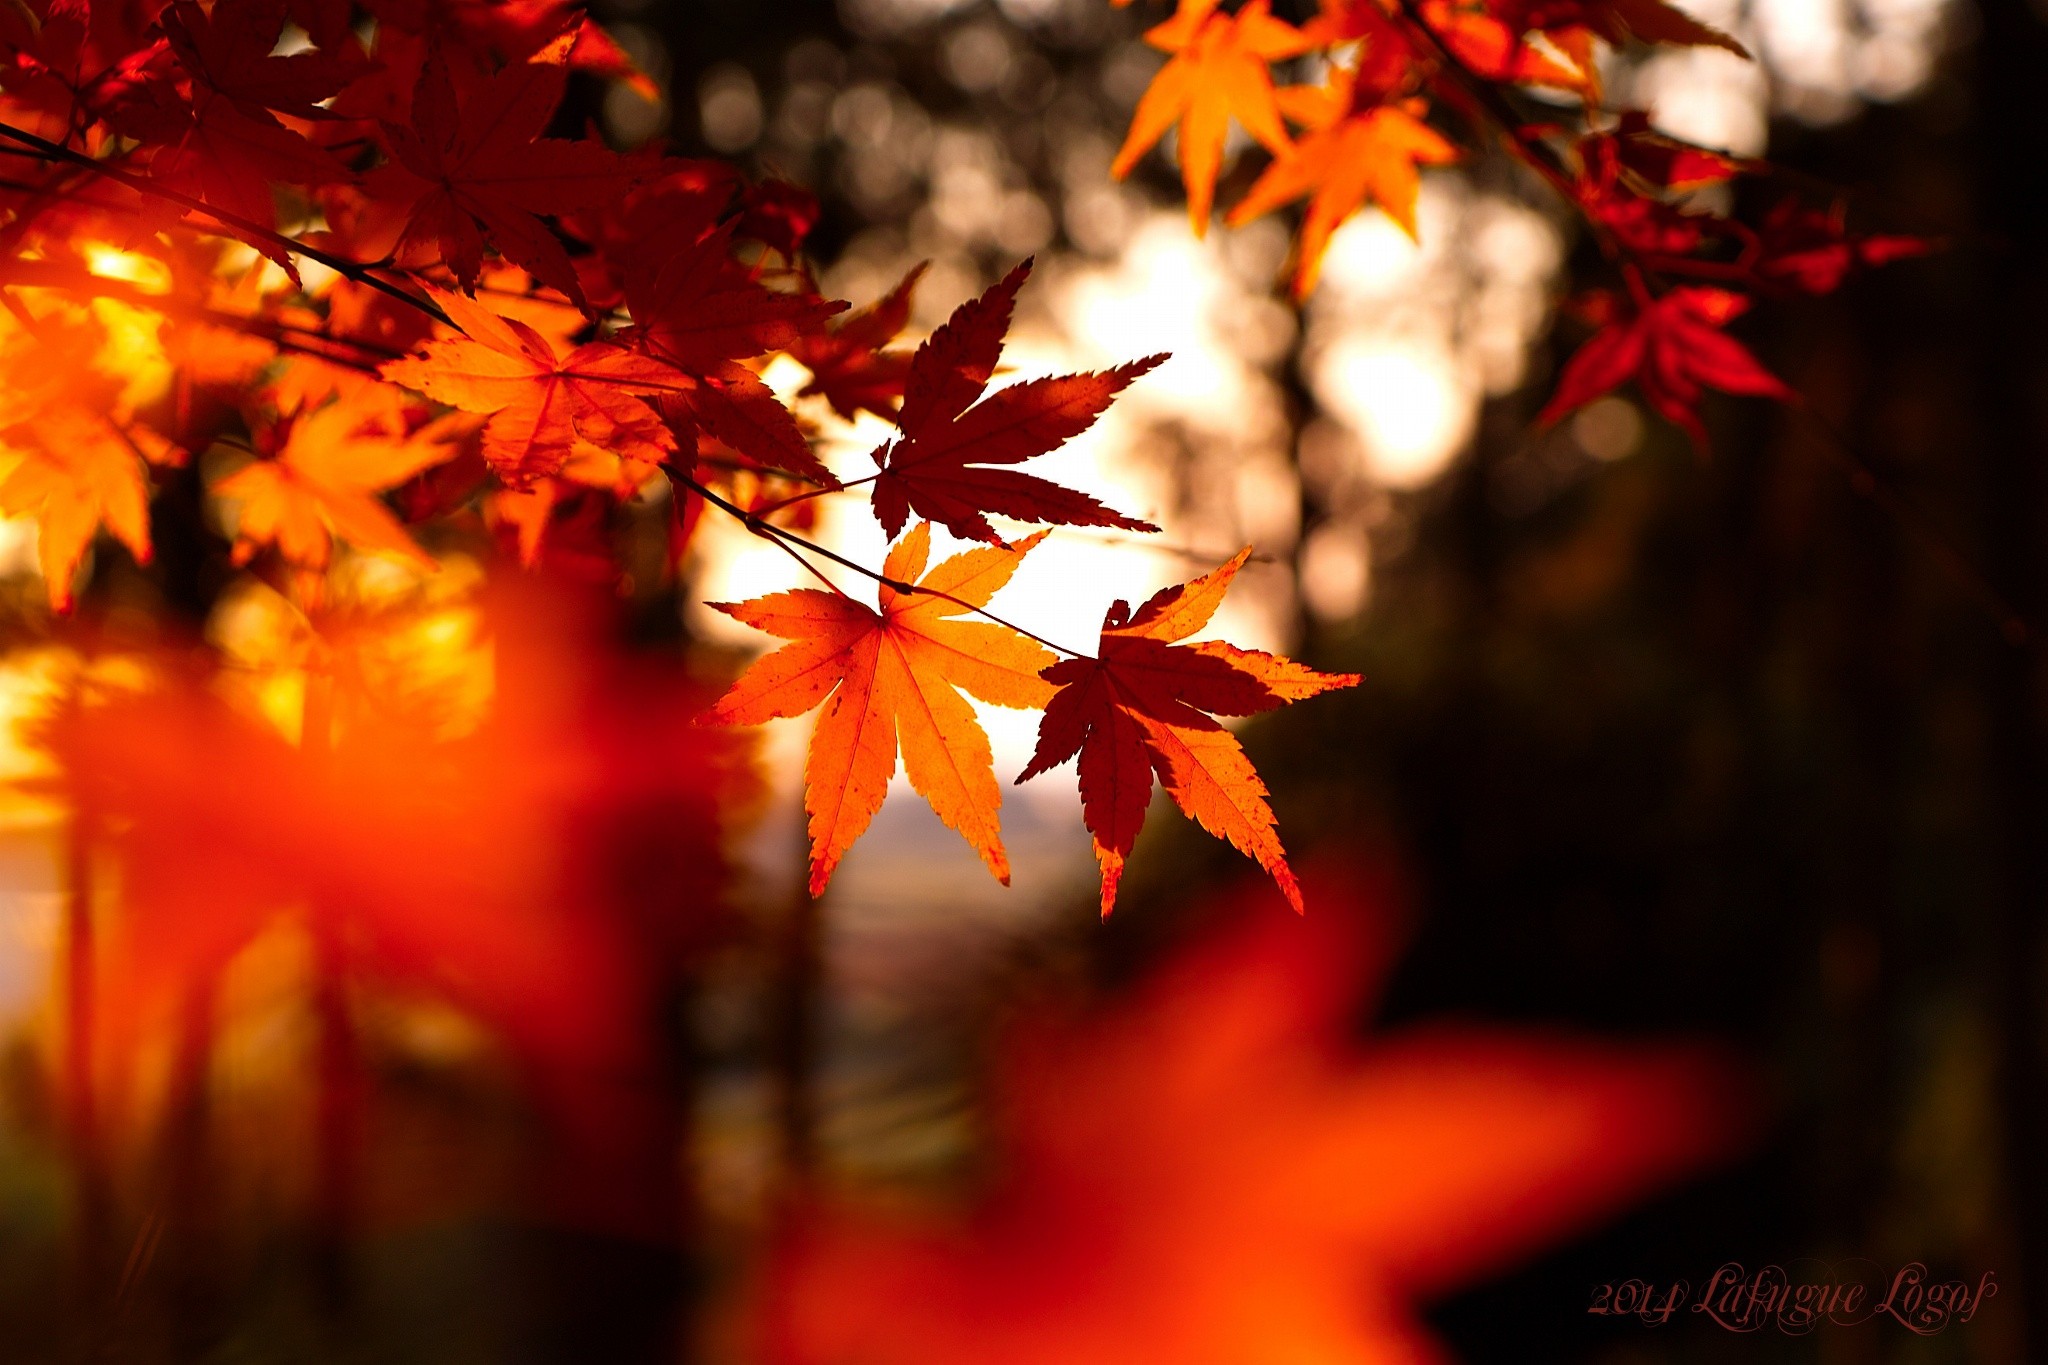 General 2048x1365 leaves fall depth of field plants outdoors 2014 (Year) maple leaves closeup watermarked